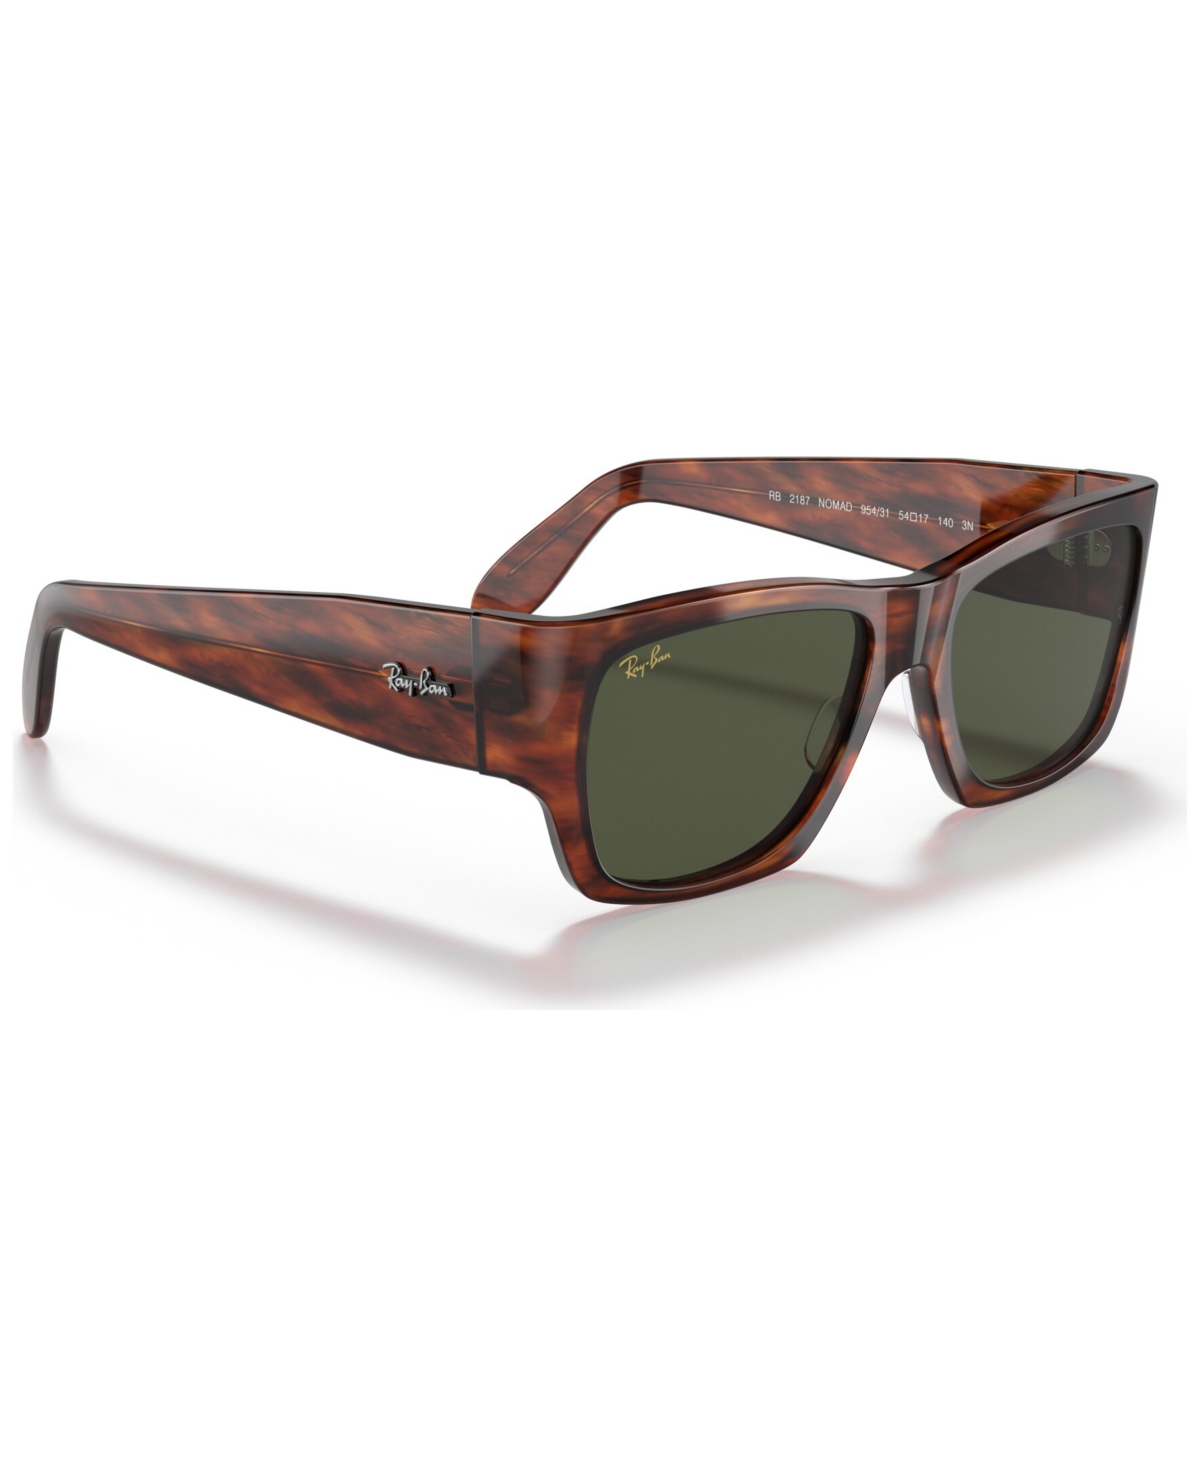 Ray Ban Unisex Nomad Reloaded Sunglasses, Rb2187 In Striped Havana